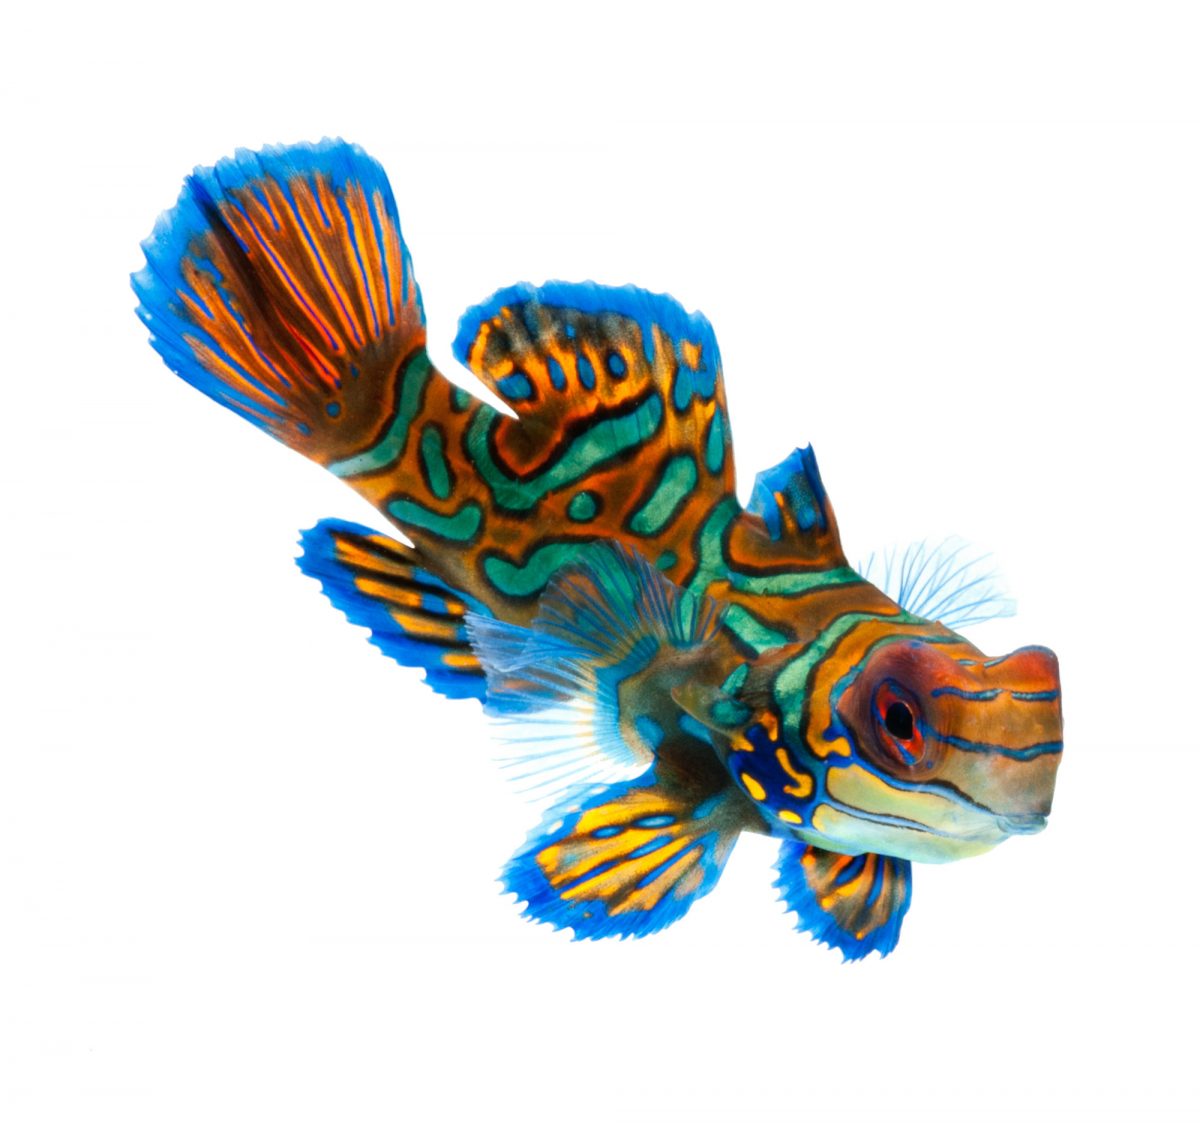 A Guide to Caring for the Mandarin Dragonet